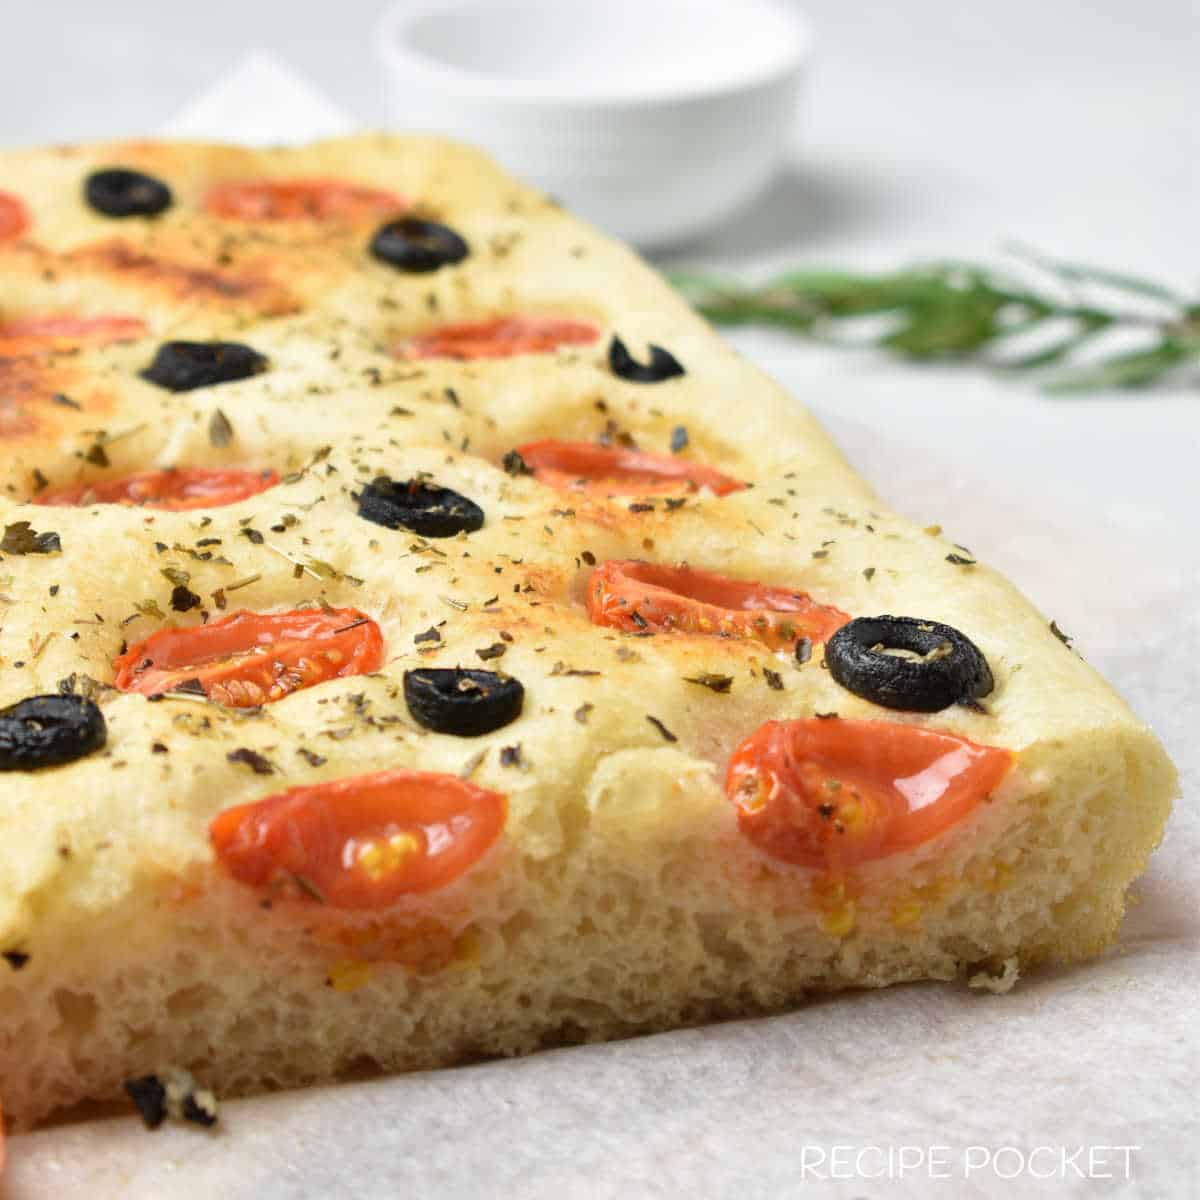 Focaccia bread with a sprig of rosemary in the background.